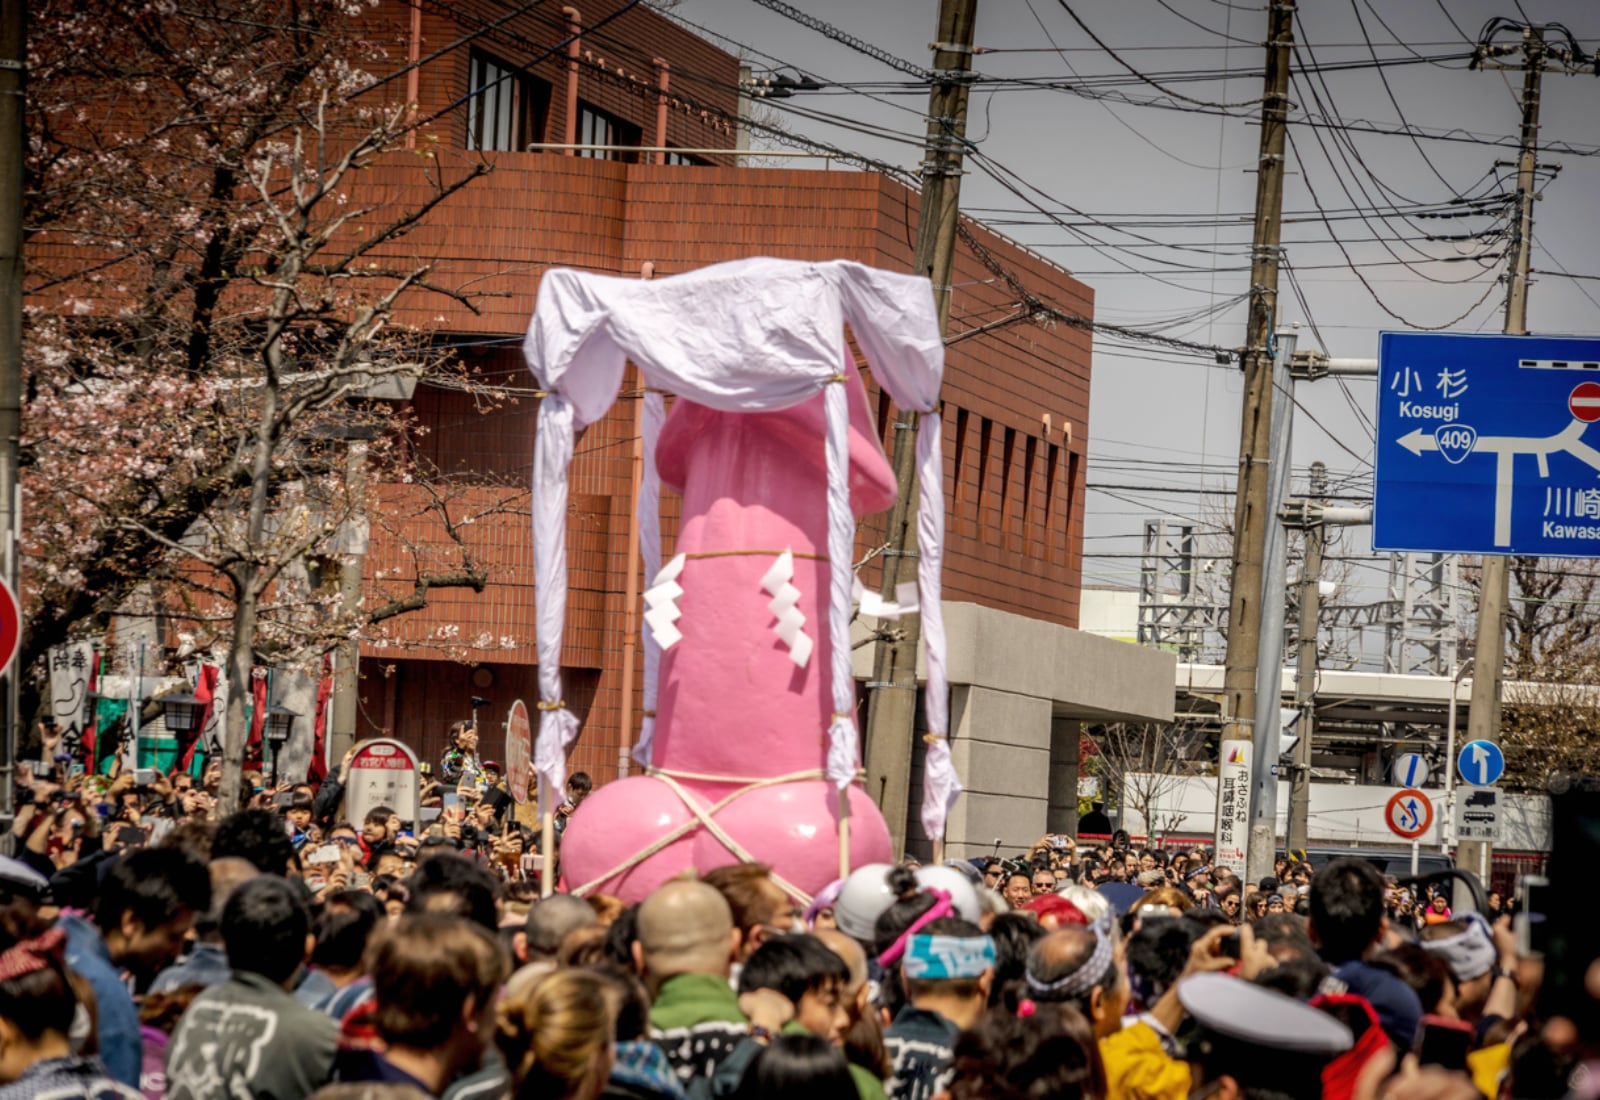 The Penis Festival Kawasaki A Guide to Japan's Art-Filled Industrial City